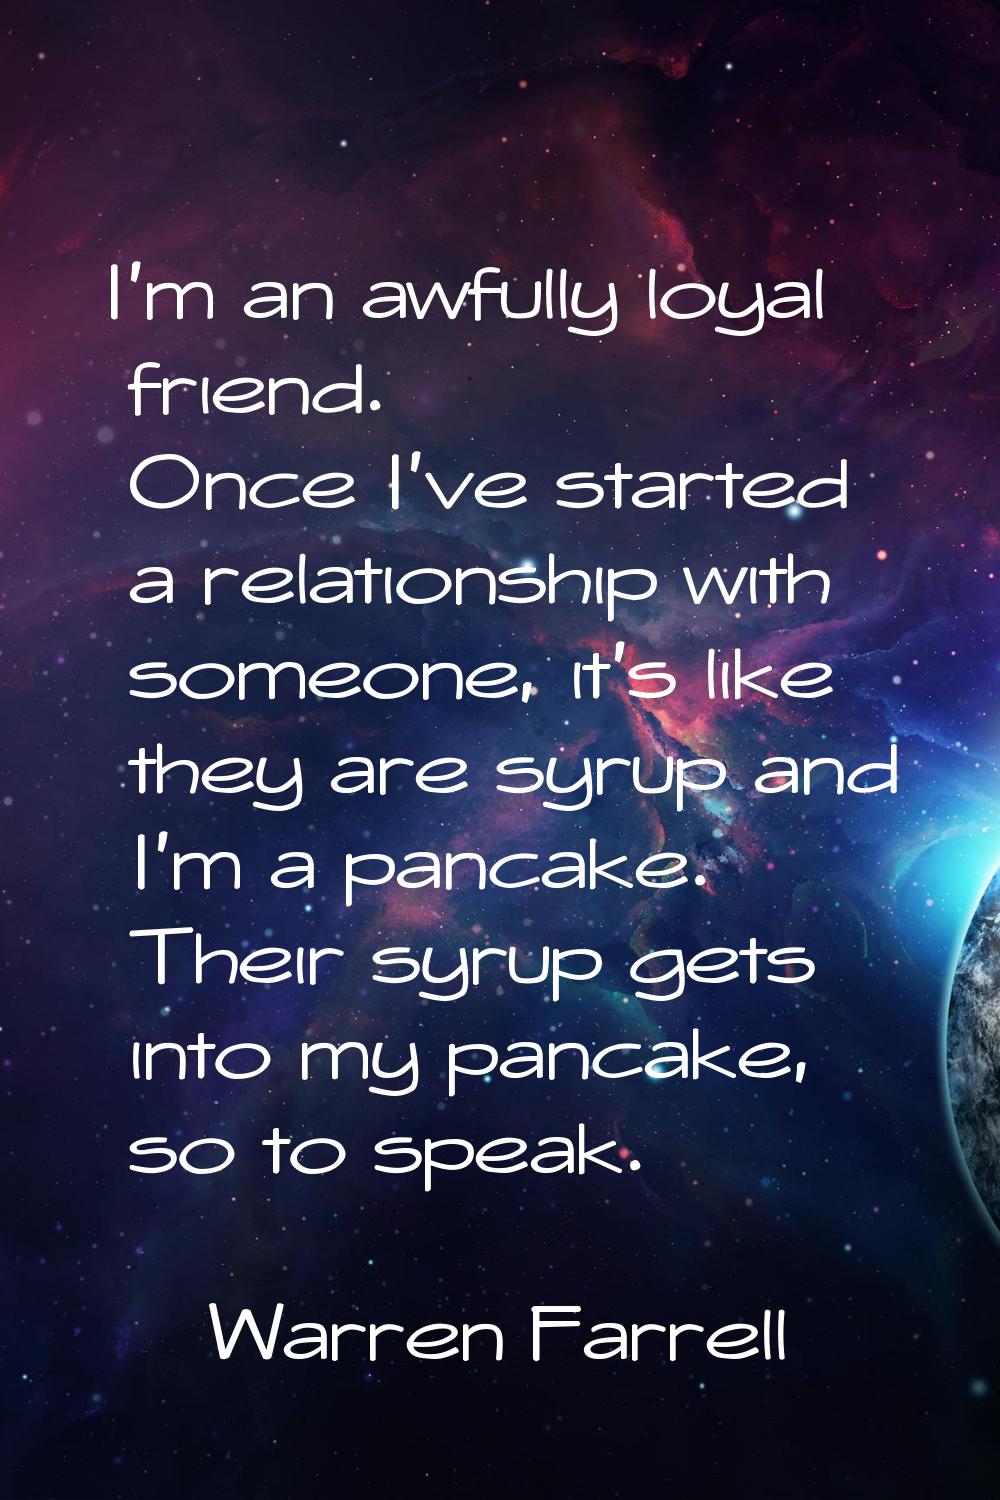 I'm an awfully loyal friend. Once I've started a relationship with someone, it's like they are syru